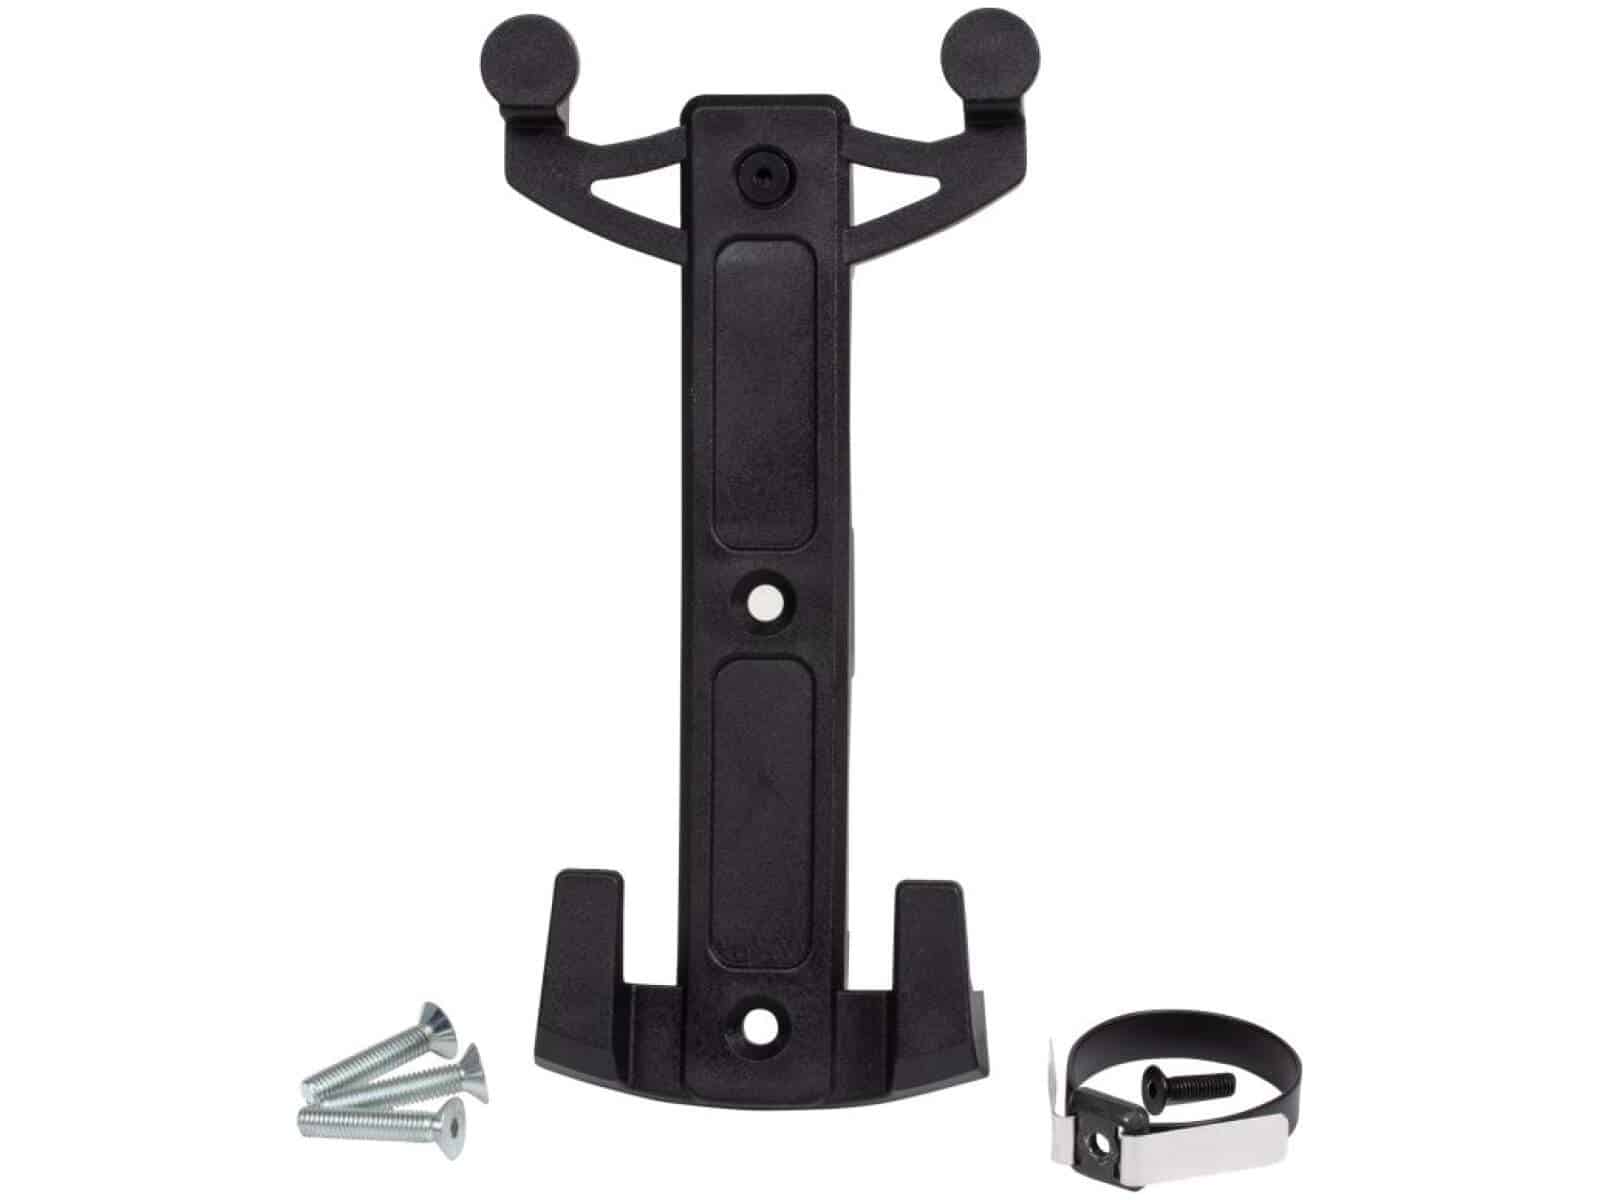 Ortlieb MOUNTING SET FOR QLS FRONT BAGS (FORK-PACK)